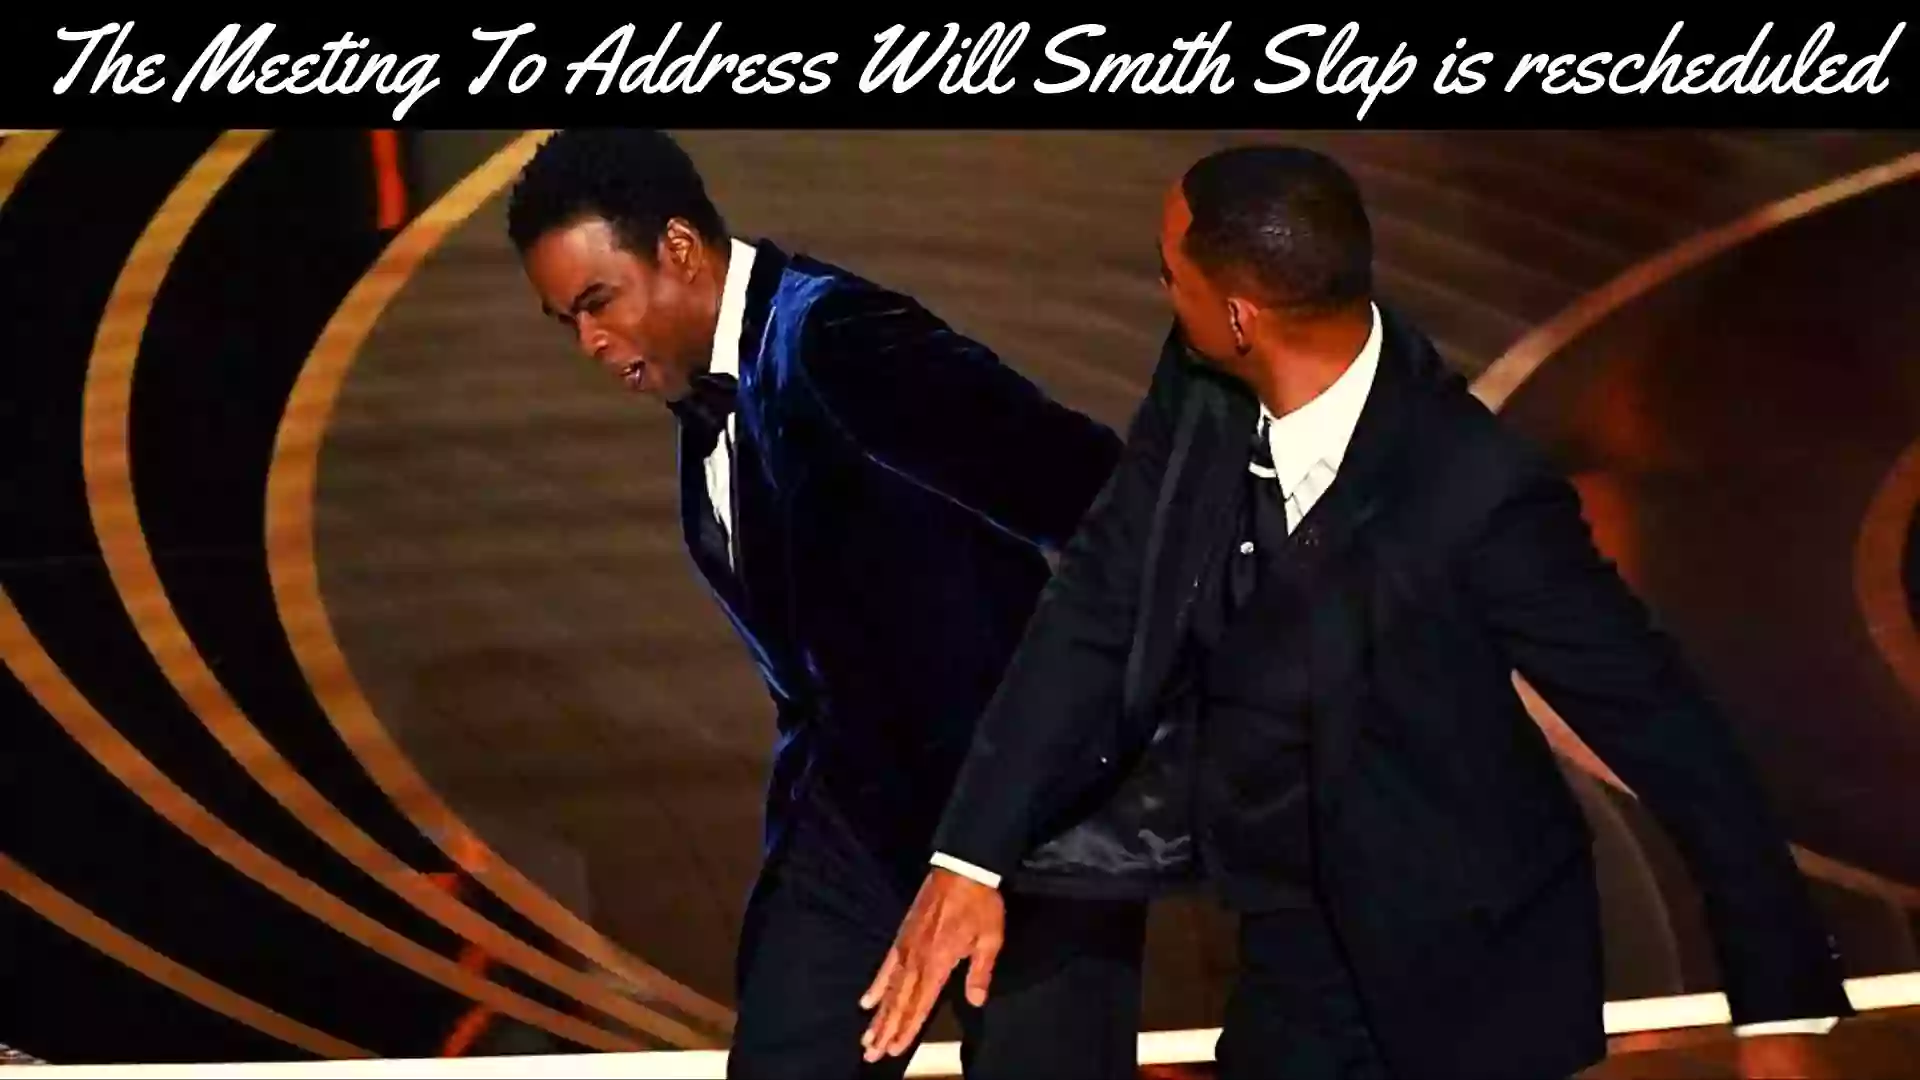 The Meeting To Address Will Smith Slap is rescheduled